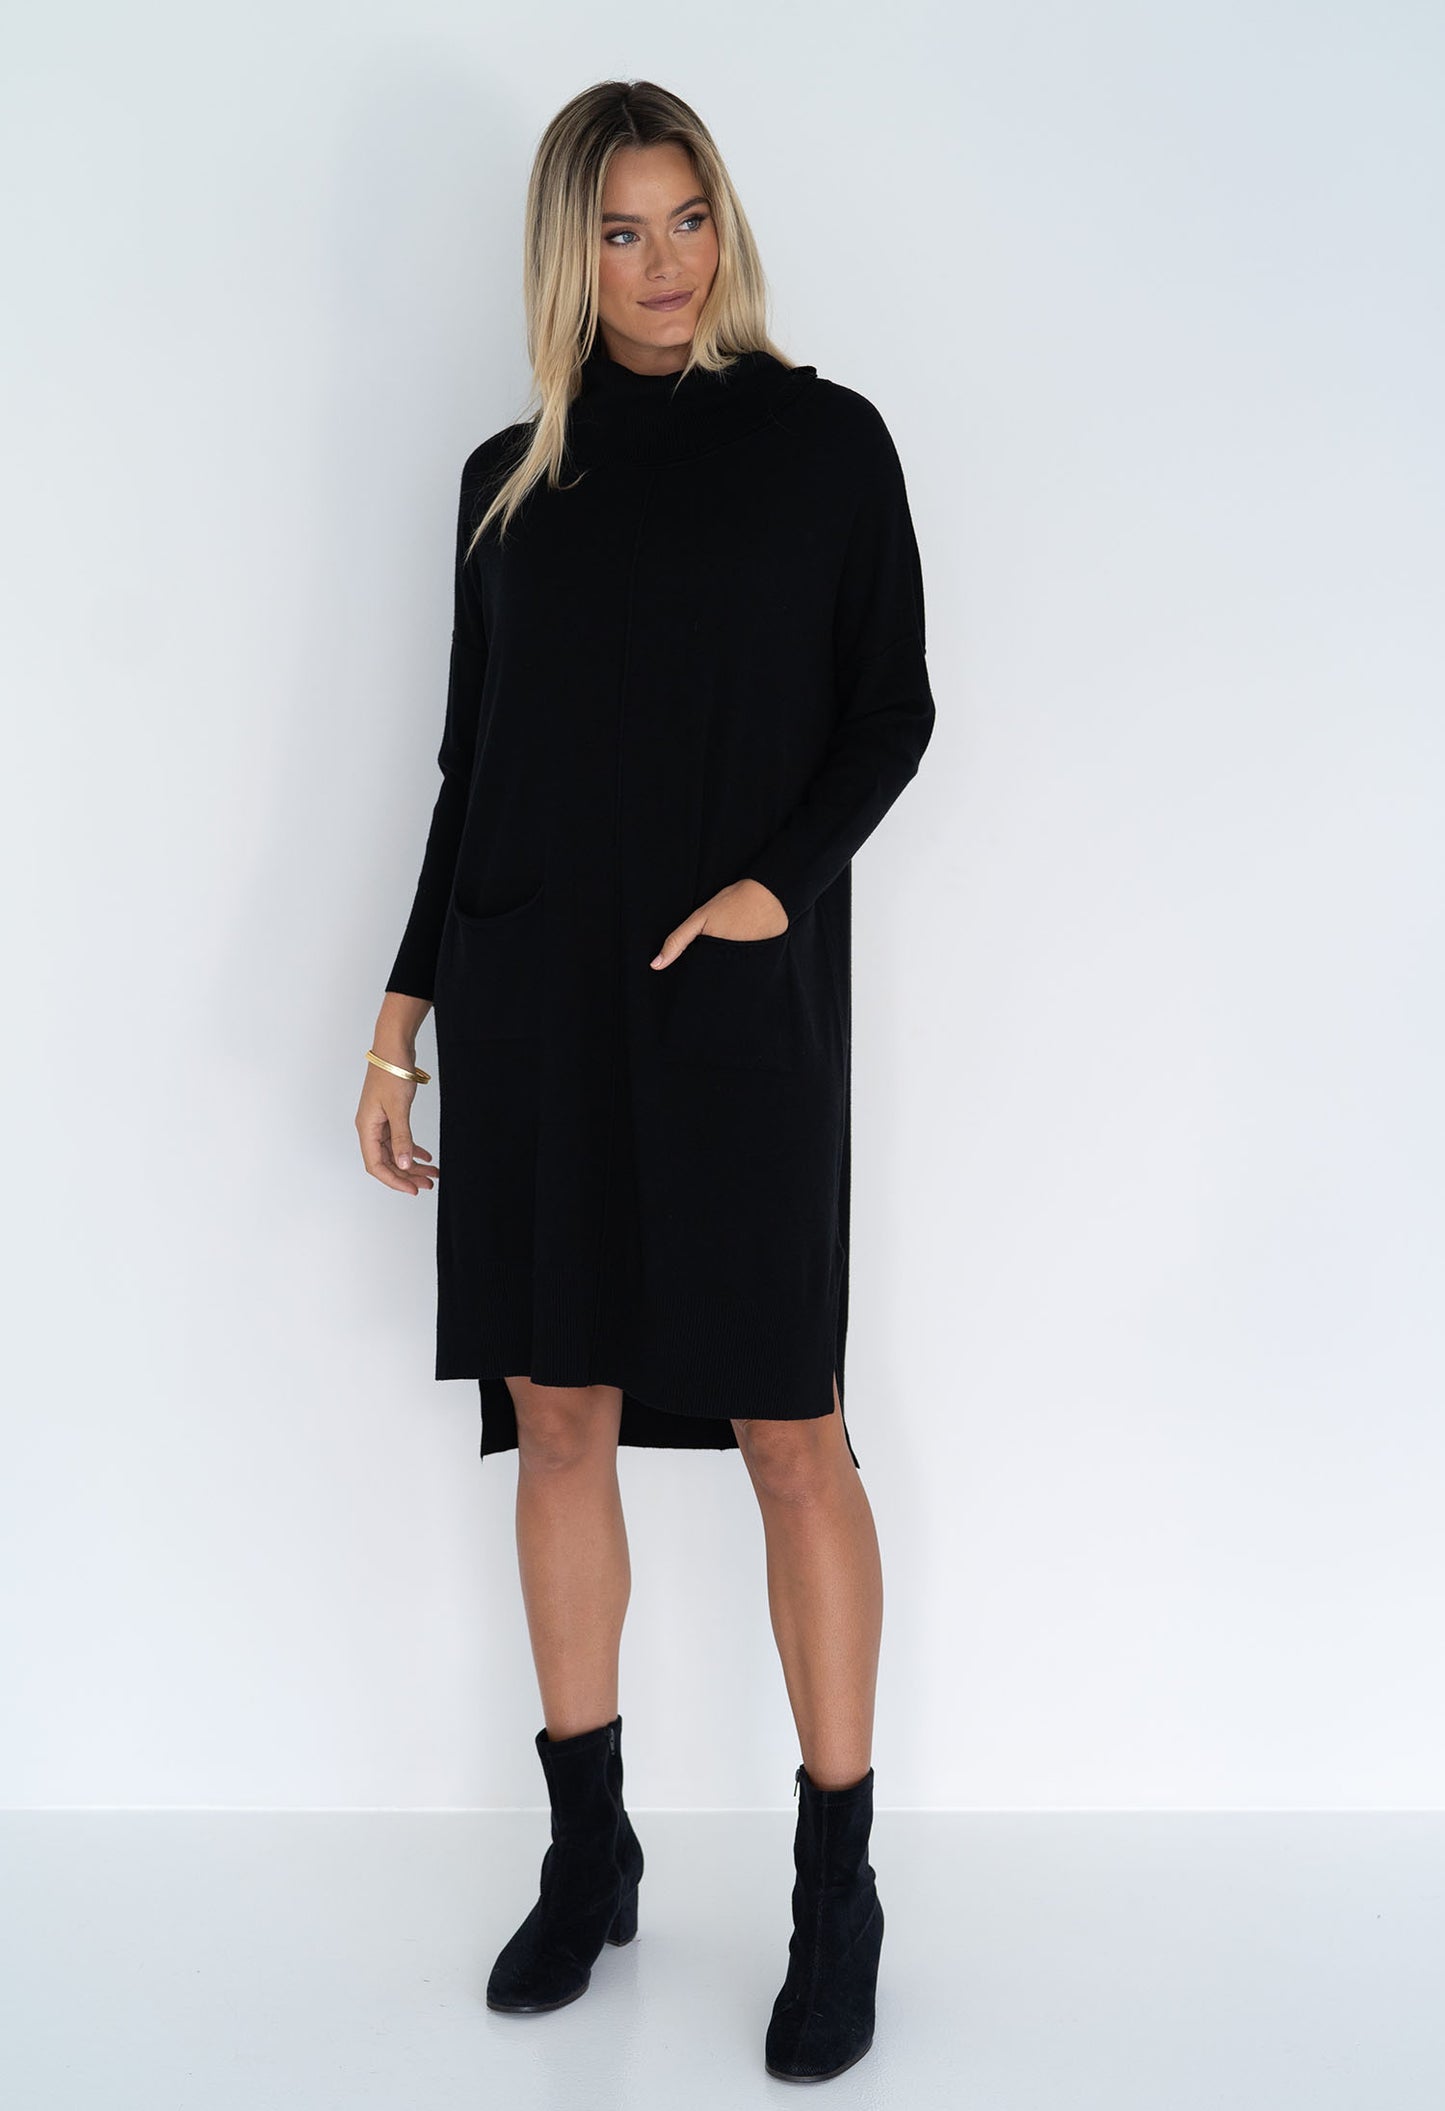 Humidity - Myra Knitted Long Sleeve Winter Dress in Chocolate and Black.